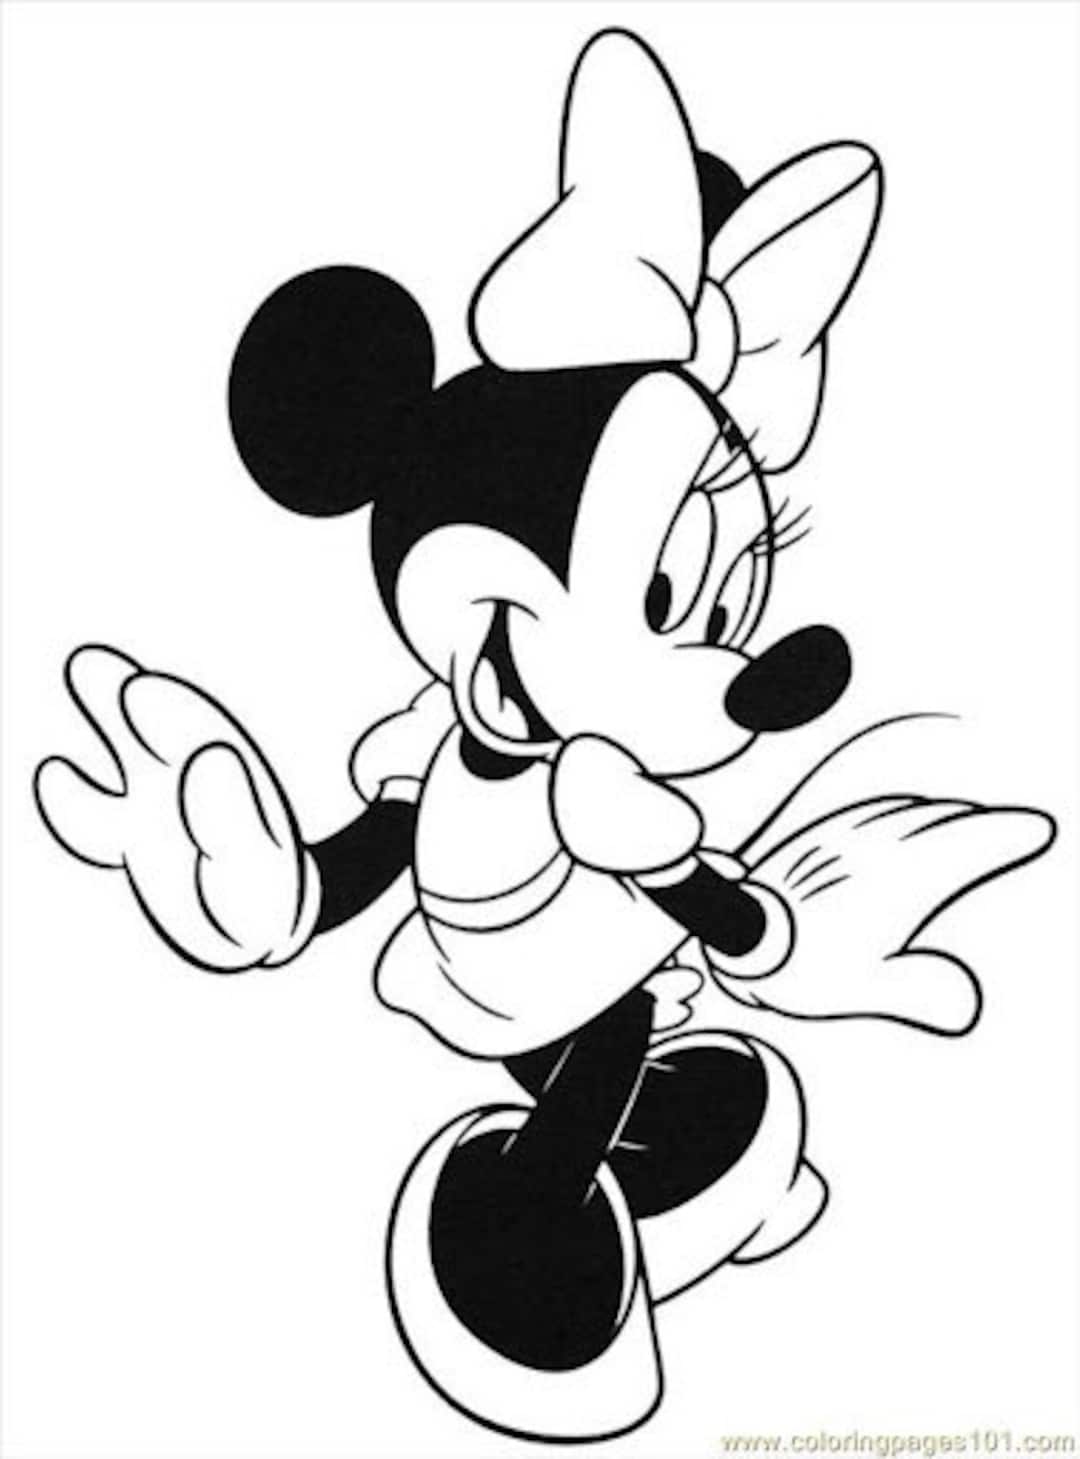 Minnie mickey mouse colouring book instant download